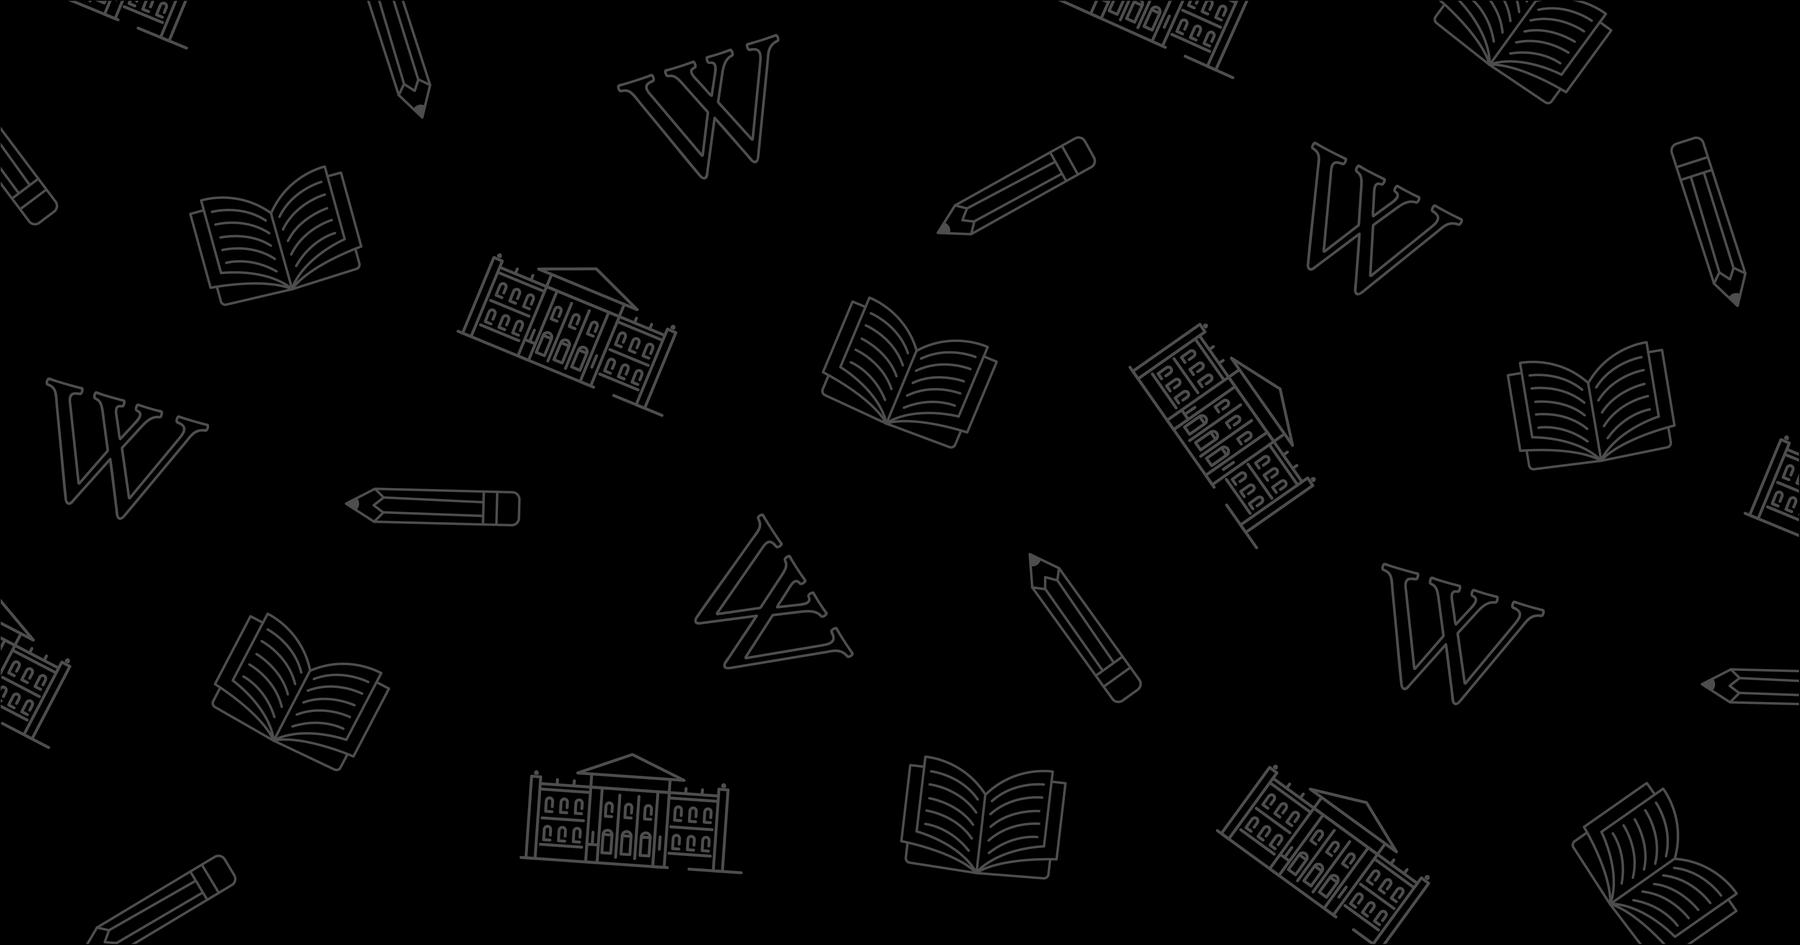 File:1Lib1Ref 2020 social media graphic background.png - a black and white pattern with arrows